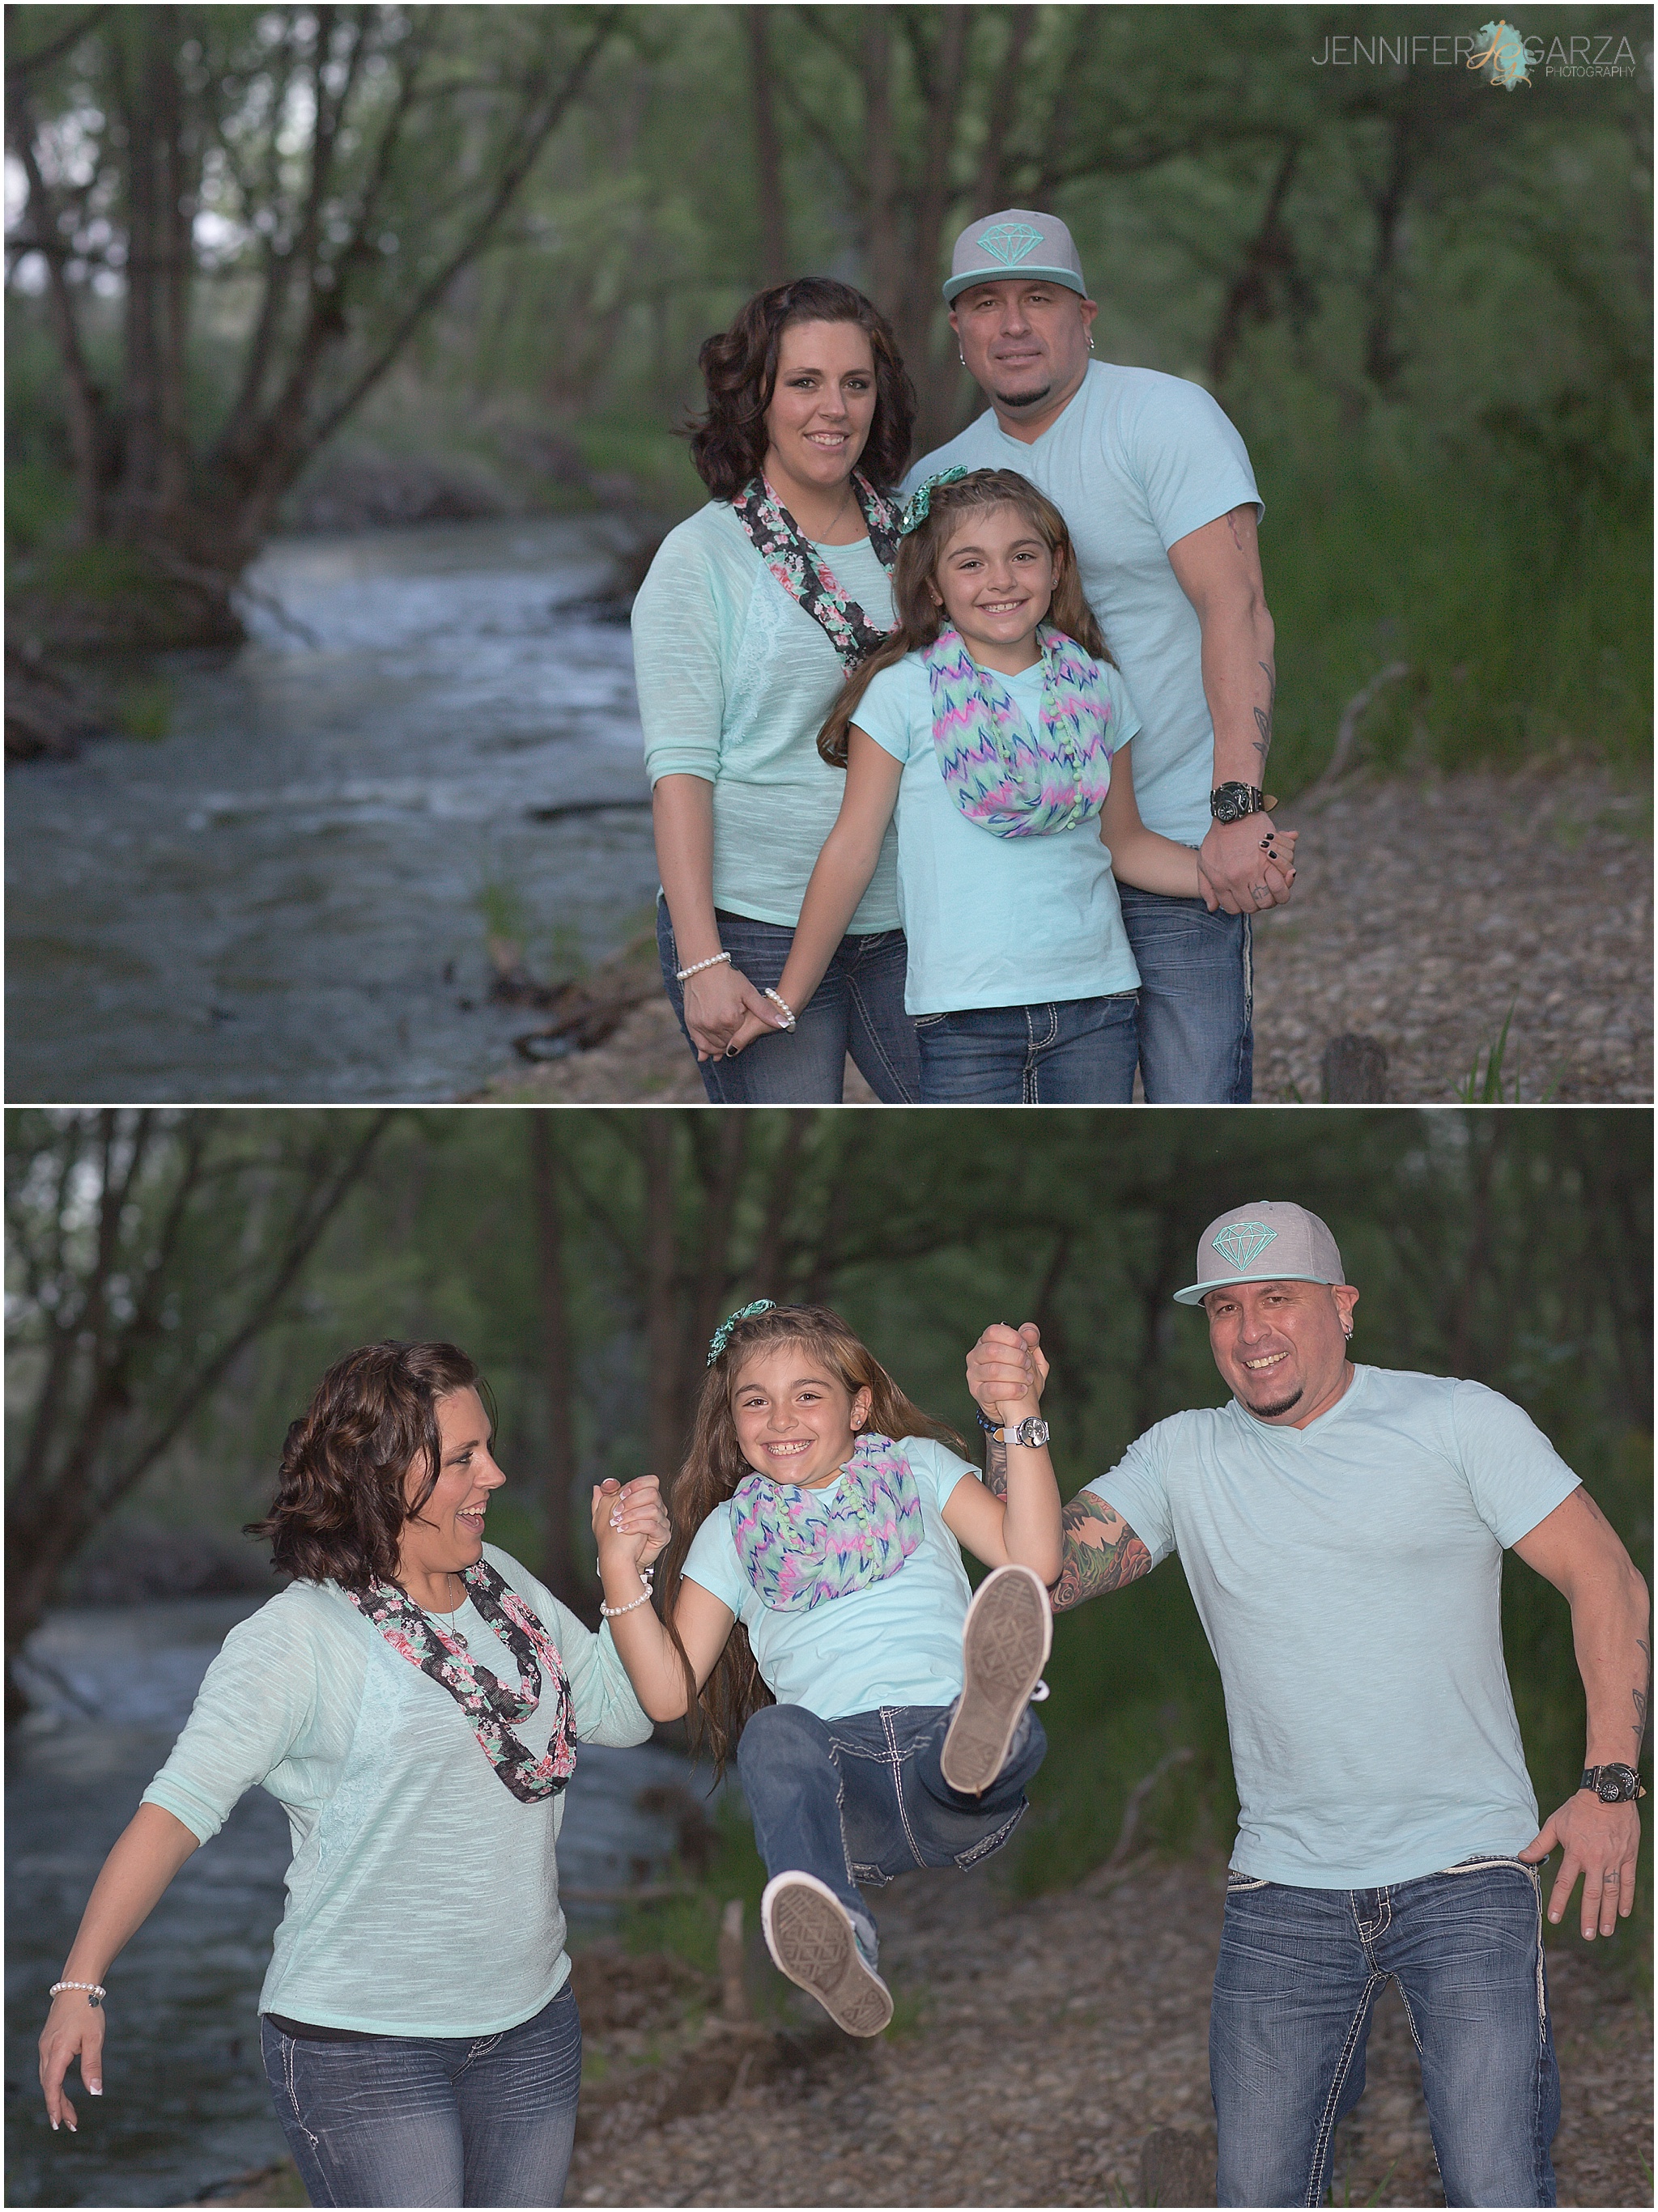 The Schlegel Family - Family Photography Session at Golden Ponds Nature Area in Longmont, Colorado